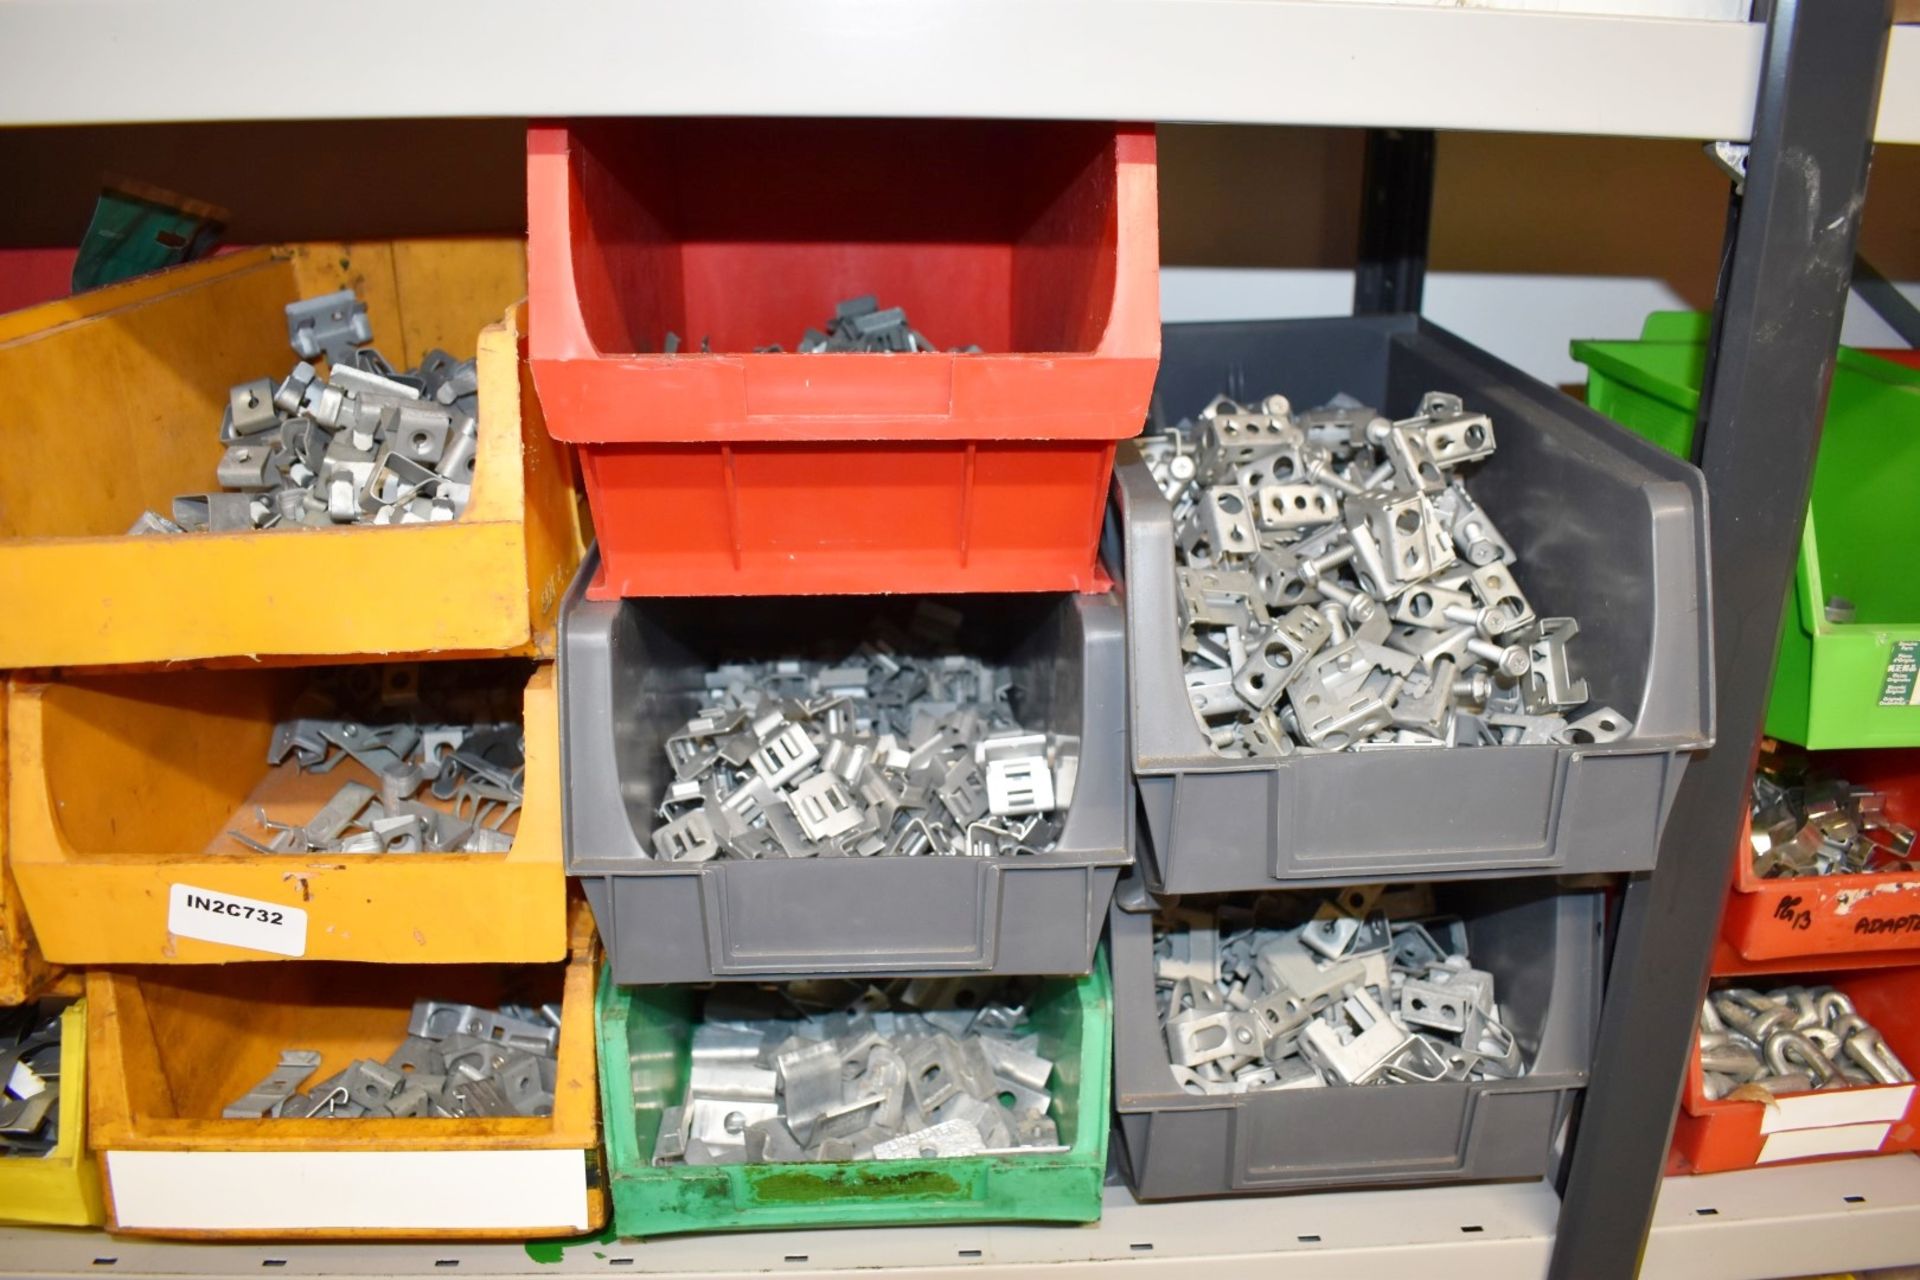 28 x Linbins With Contents & Approx 30 Boxes of Stock - Britclips, Rod Clips, Conduit Clips & More - Image 16 of 19